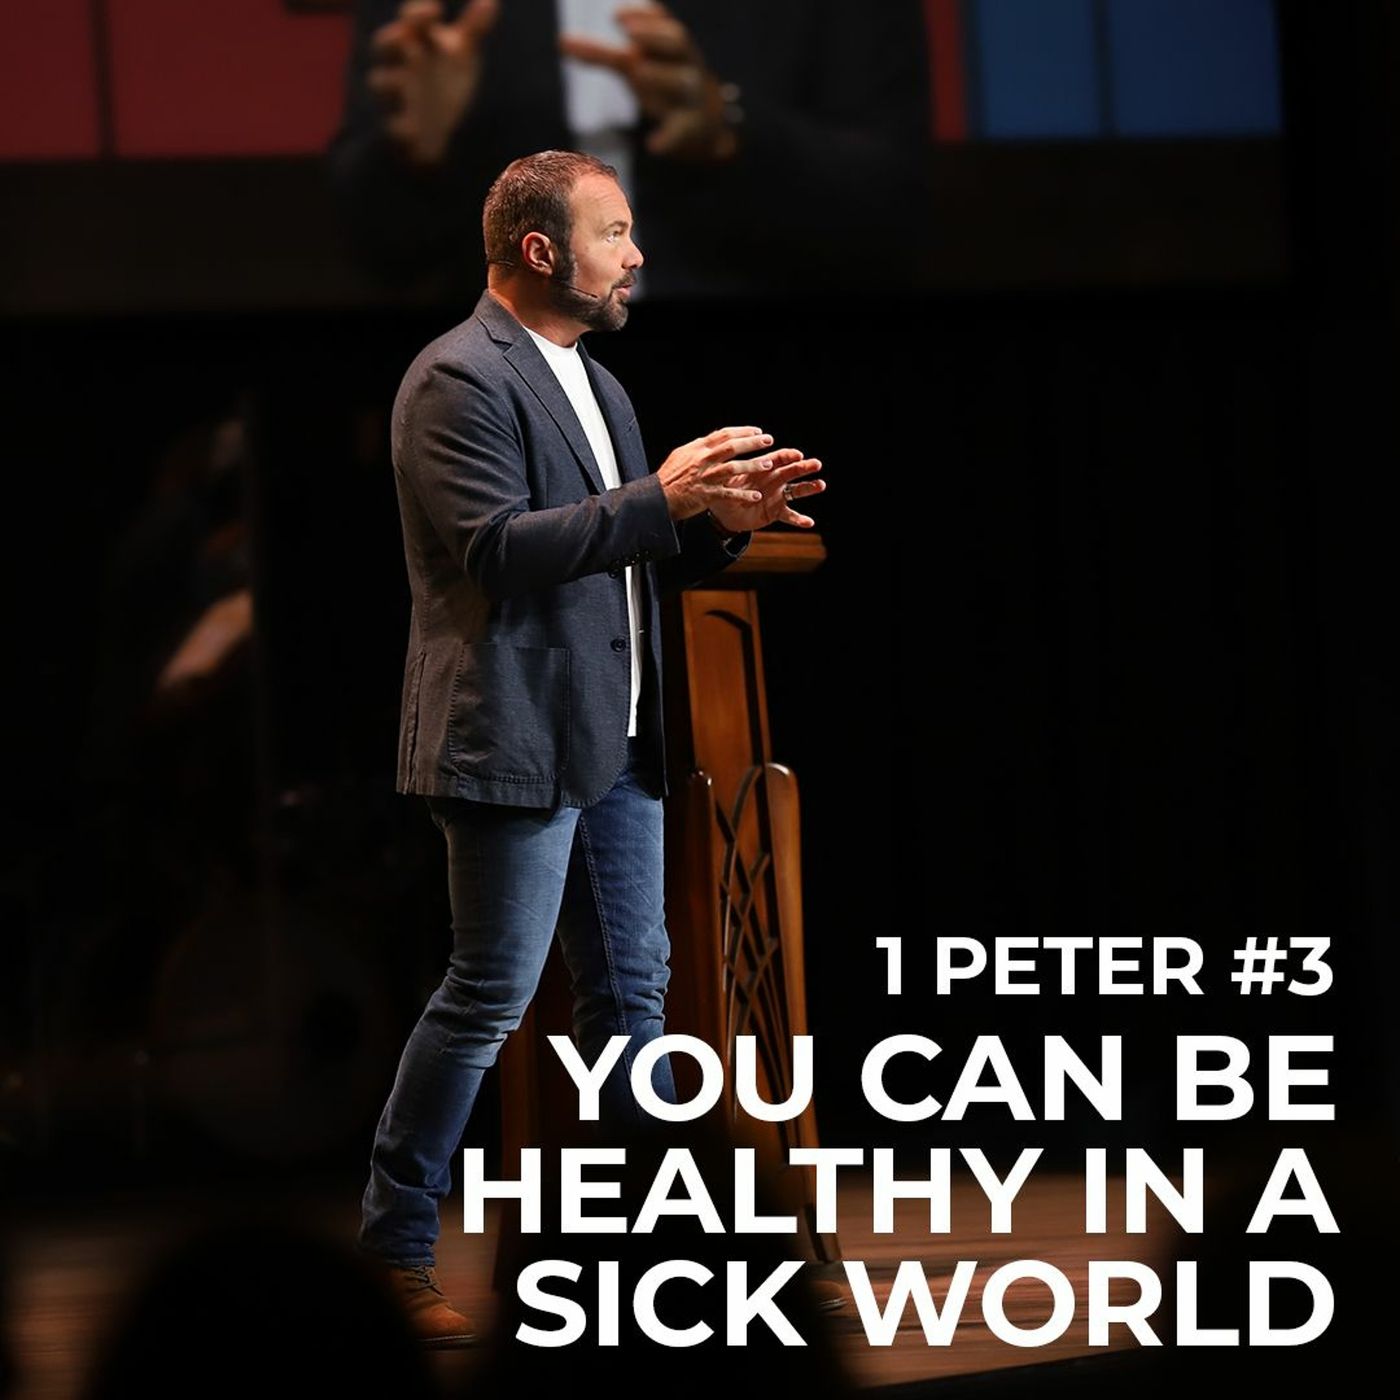 1st Peter #3 - You Can Be Healthy in a Sick World!